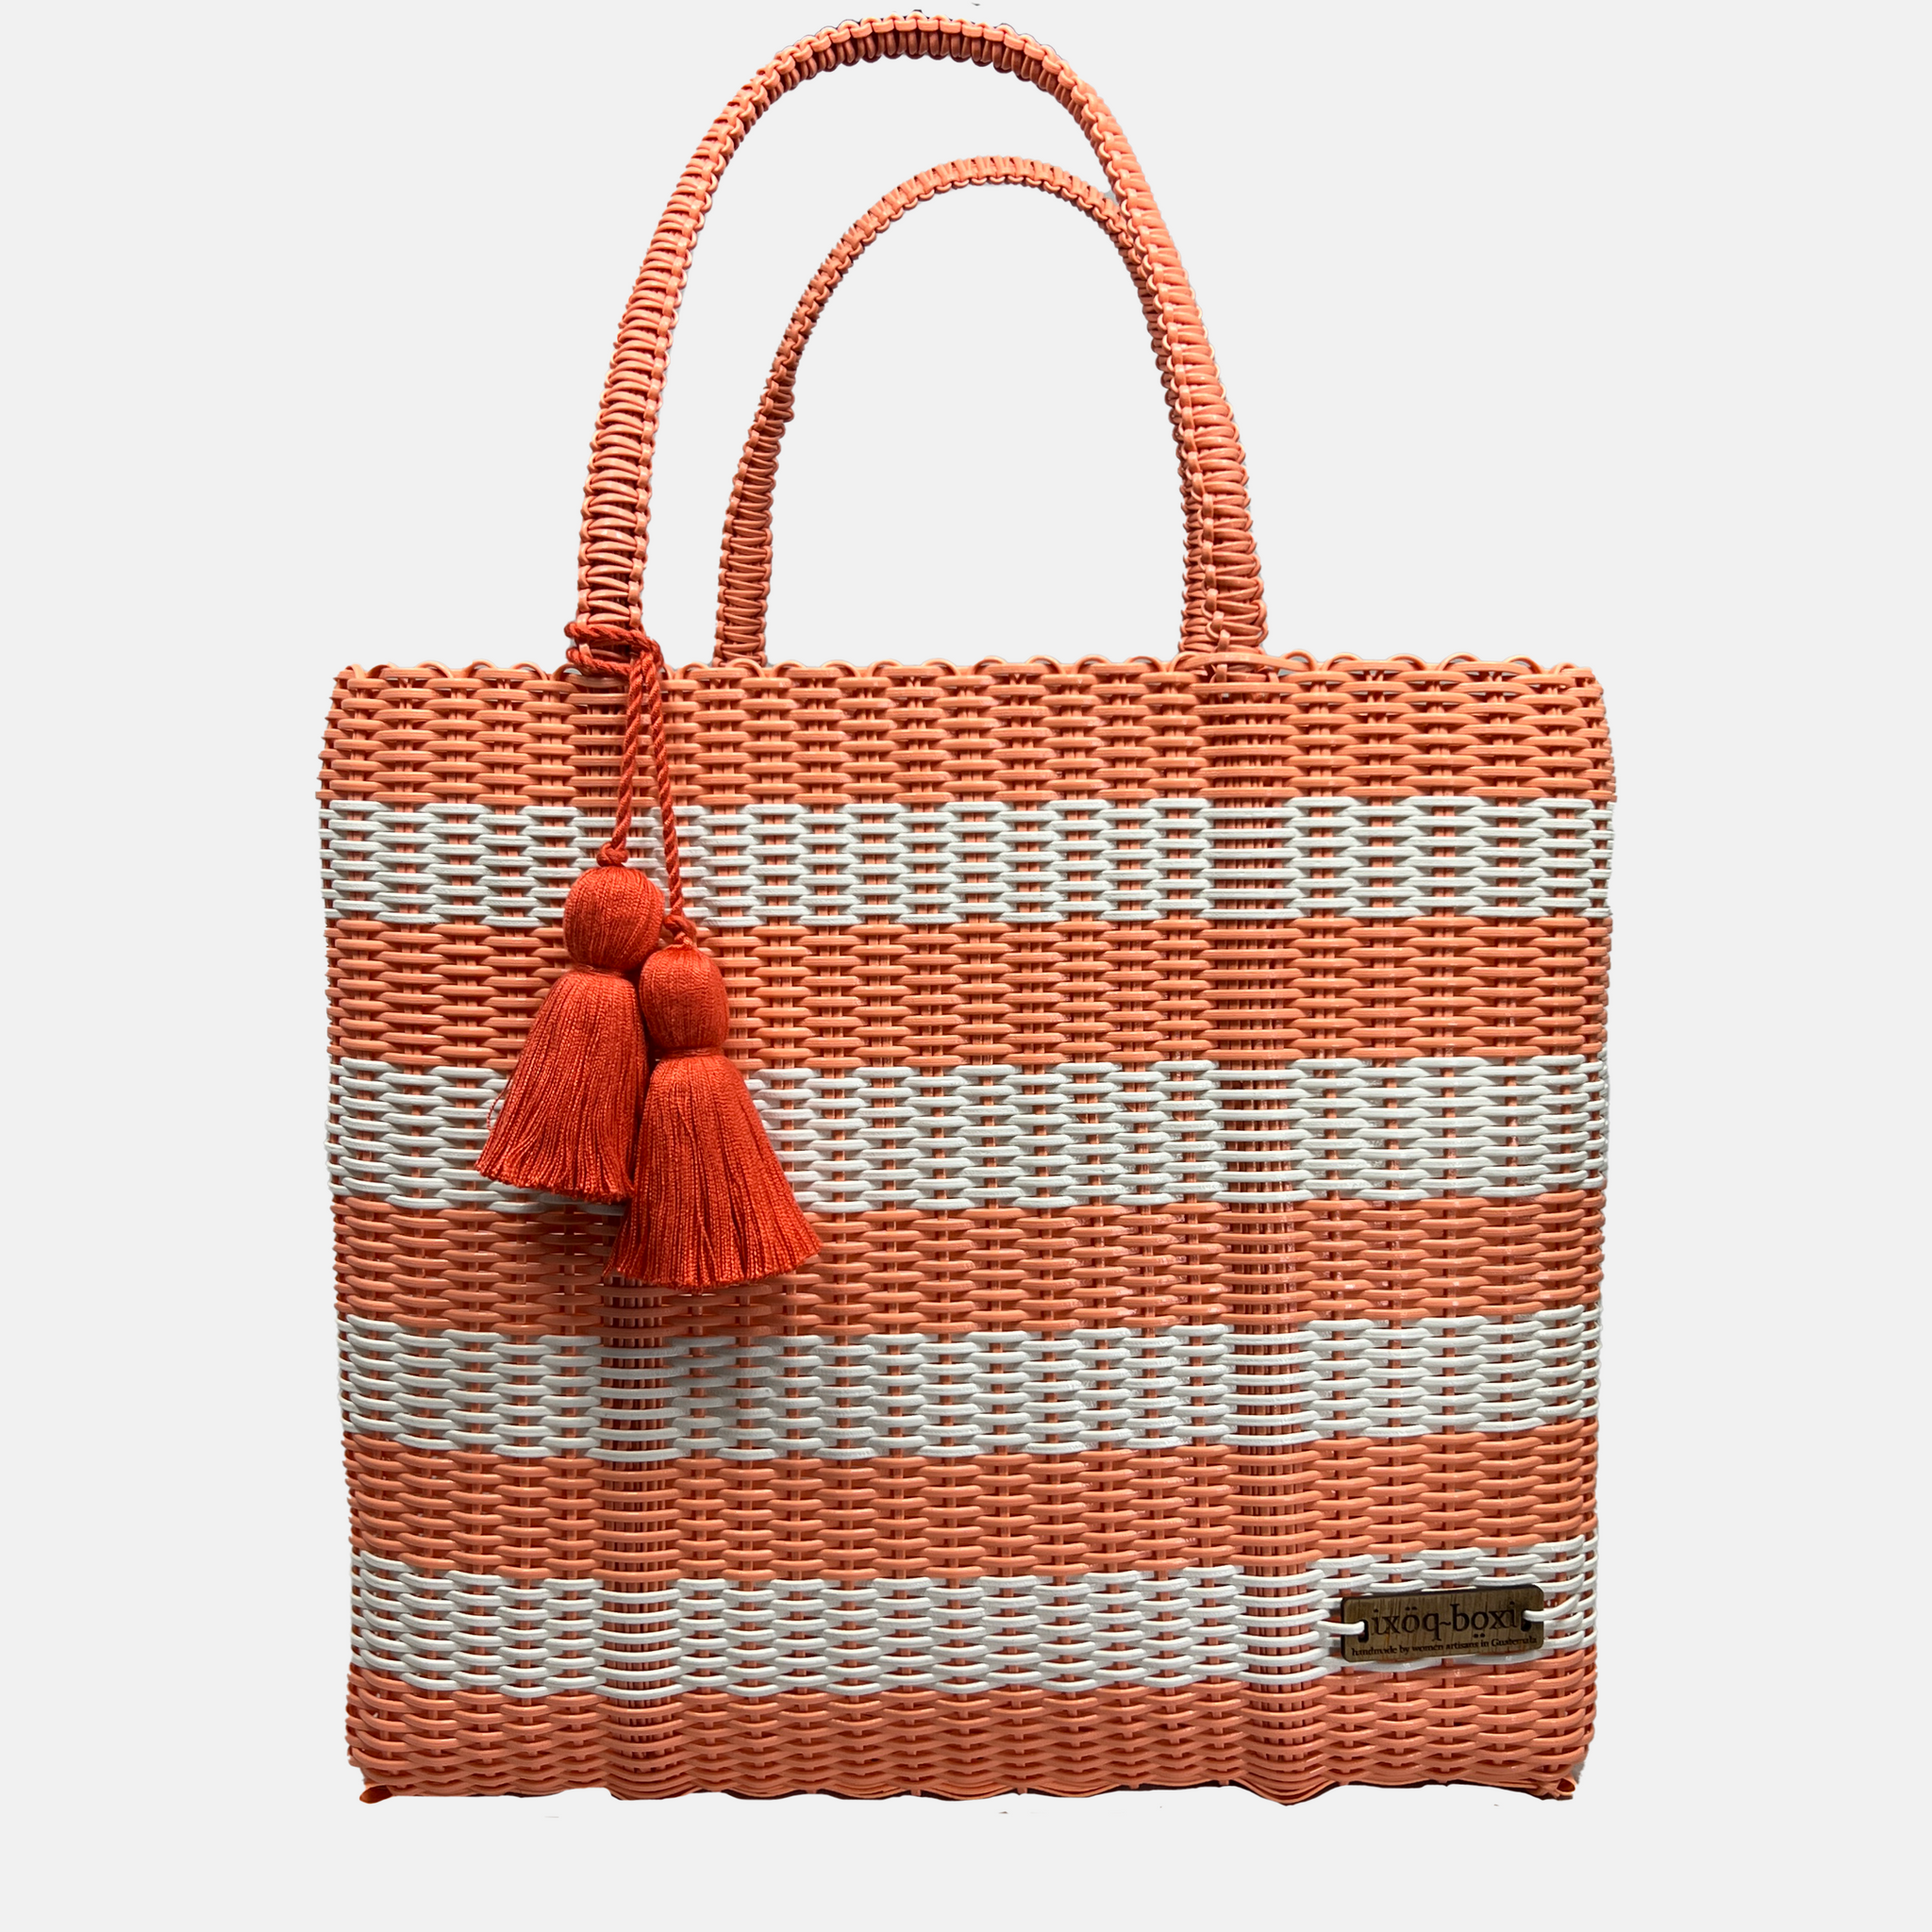 2023 SUMMER BAG FROM TARGET | Gallery posted by Al | Tastes DC | Lemon8